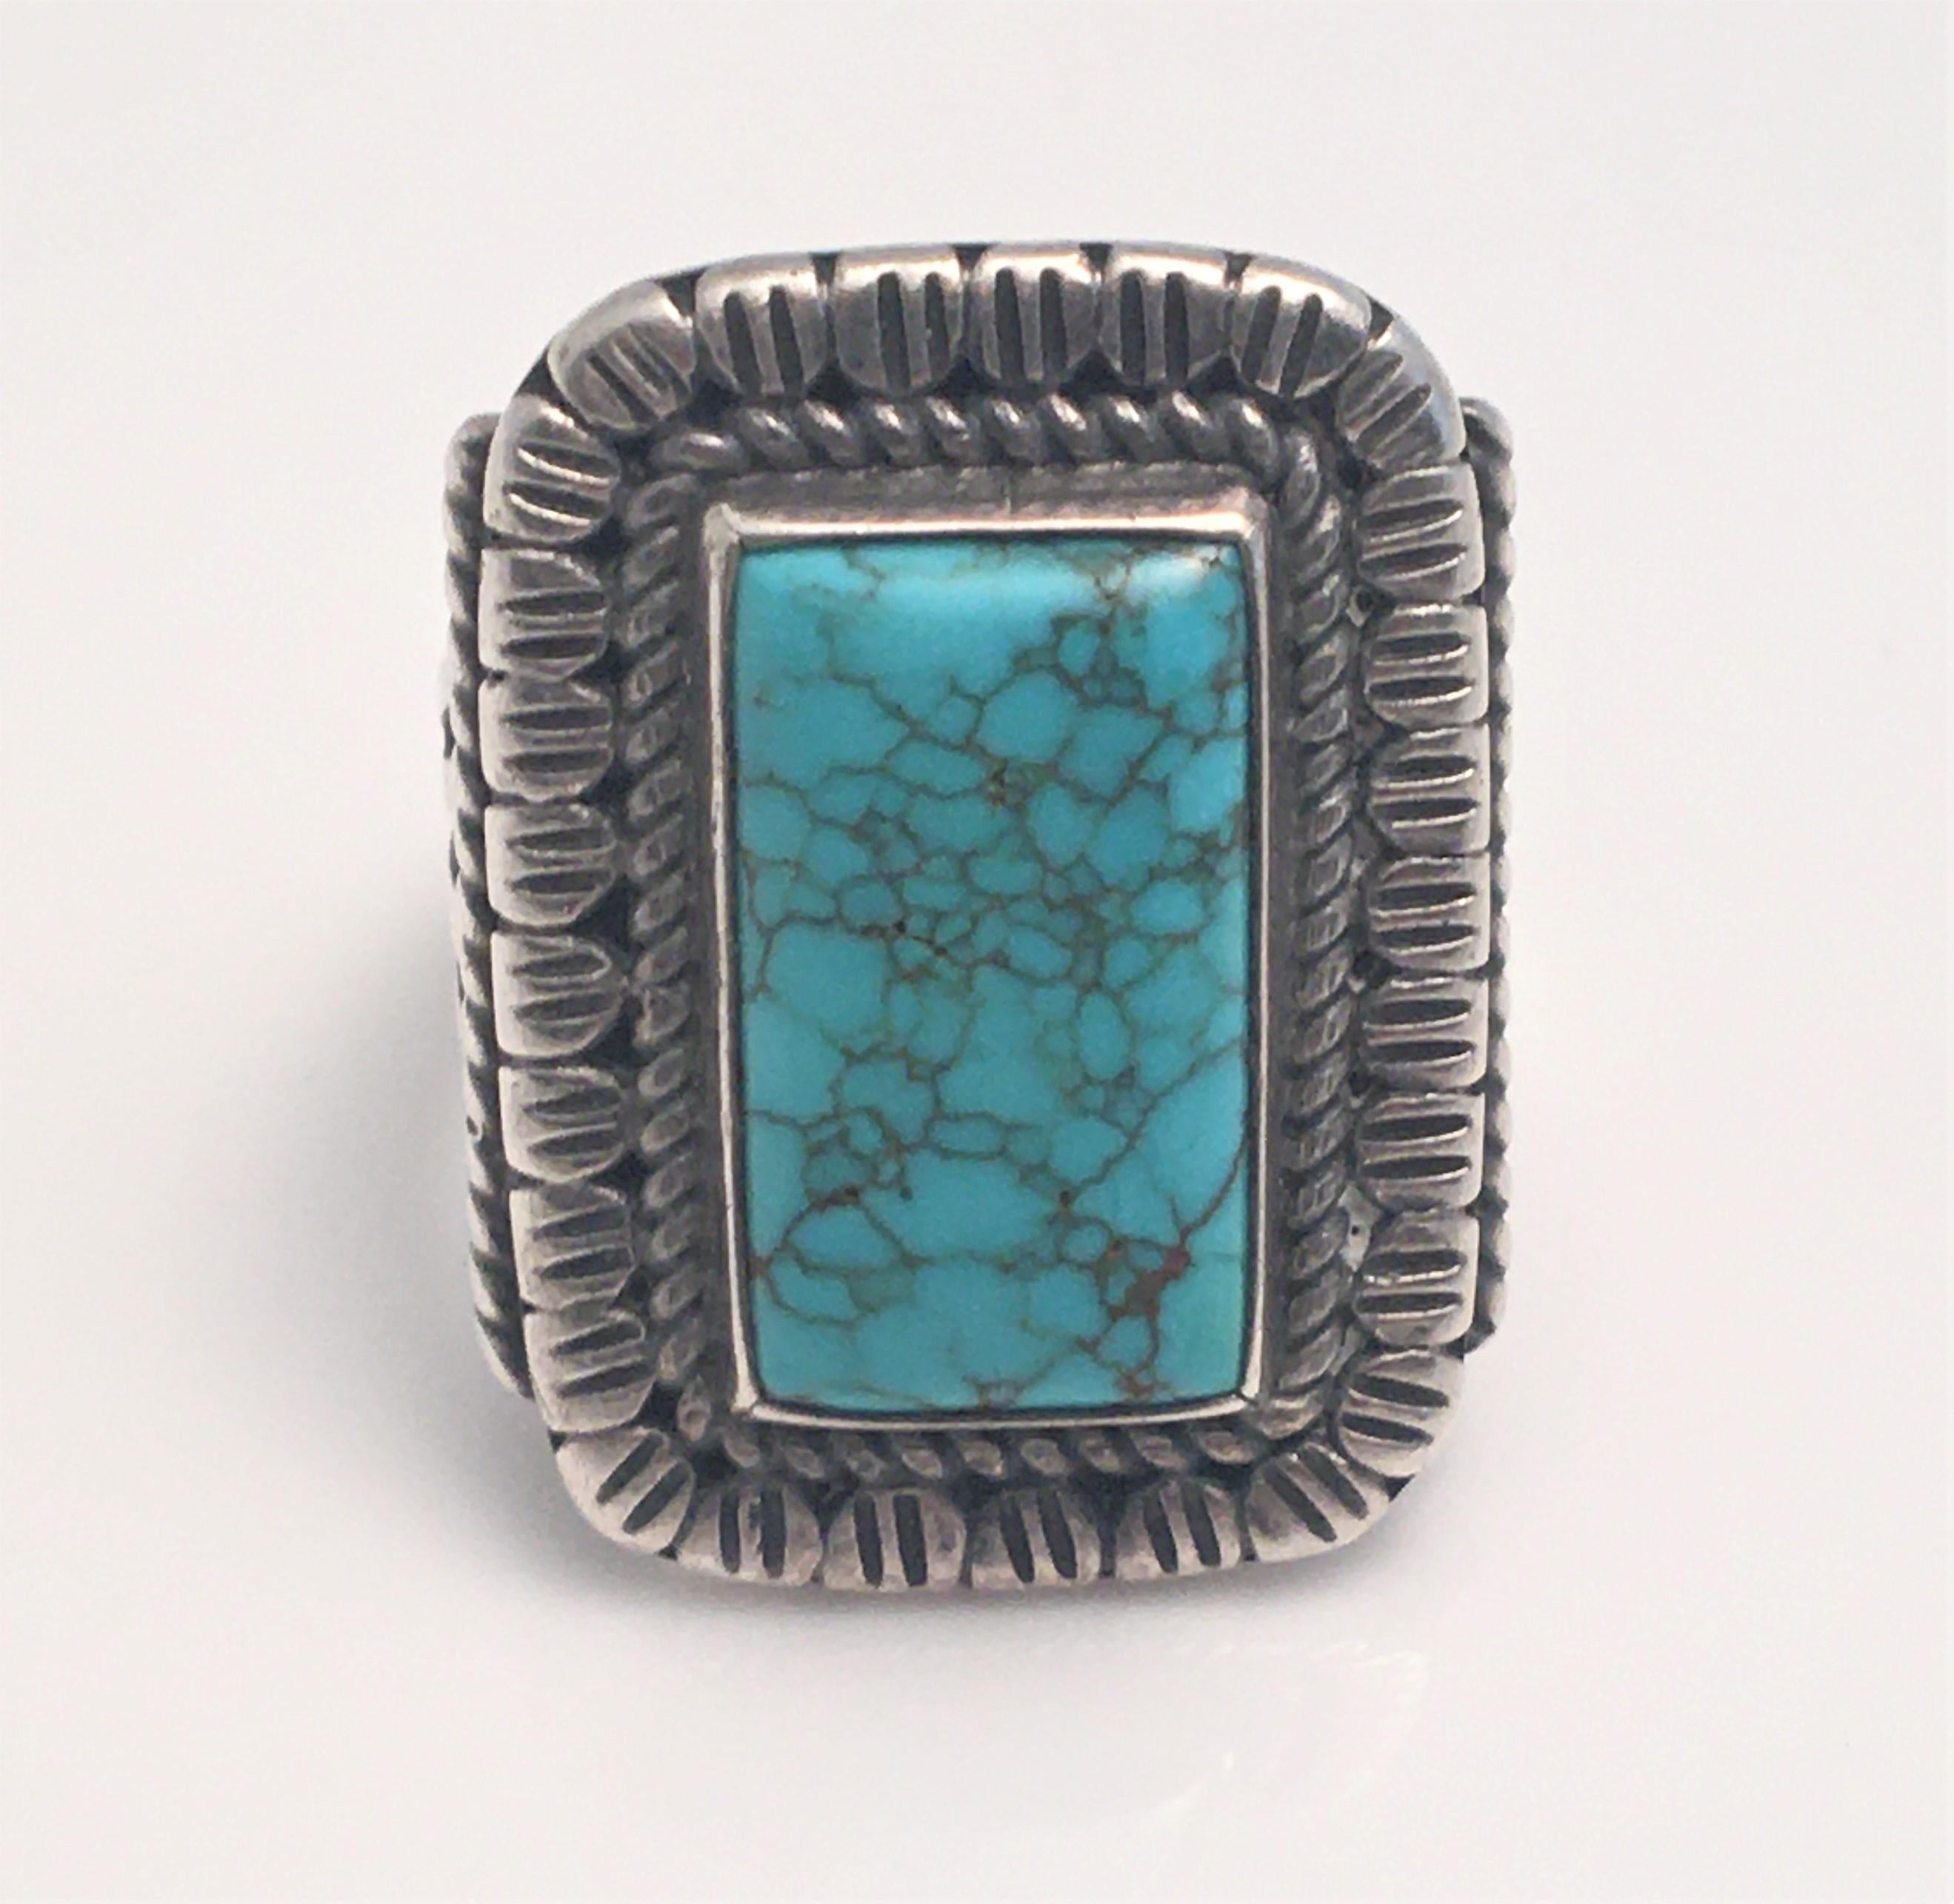 This unique and beautiful sterling silver and turquoise set will be sure to get a lot of compliments.
Navajo inspired turquoise ring and bracelet with beautiful design.
RING:
Detailed sterling silver surrounds a rectangular turquoise stone